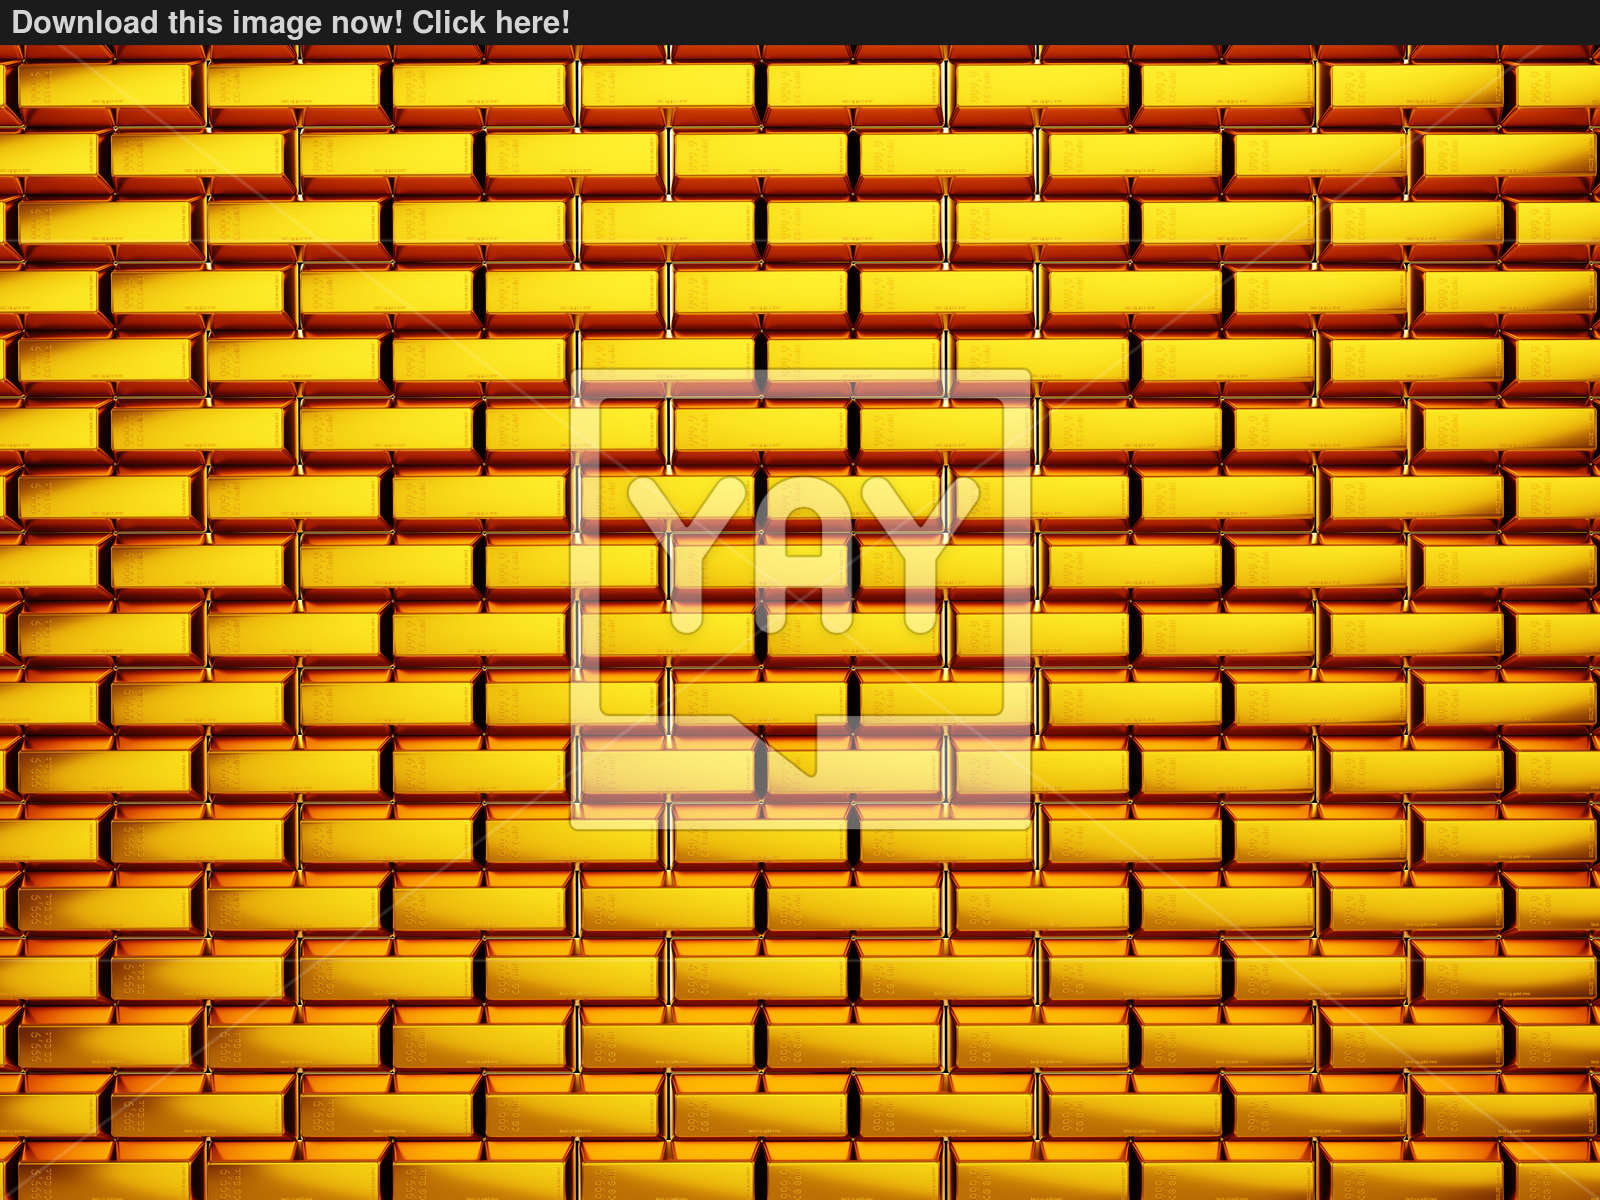 6 Million Other Stock Images - Stack Of Gold Bars , HD Wallpaper & Backgrounds